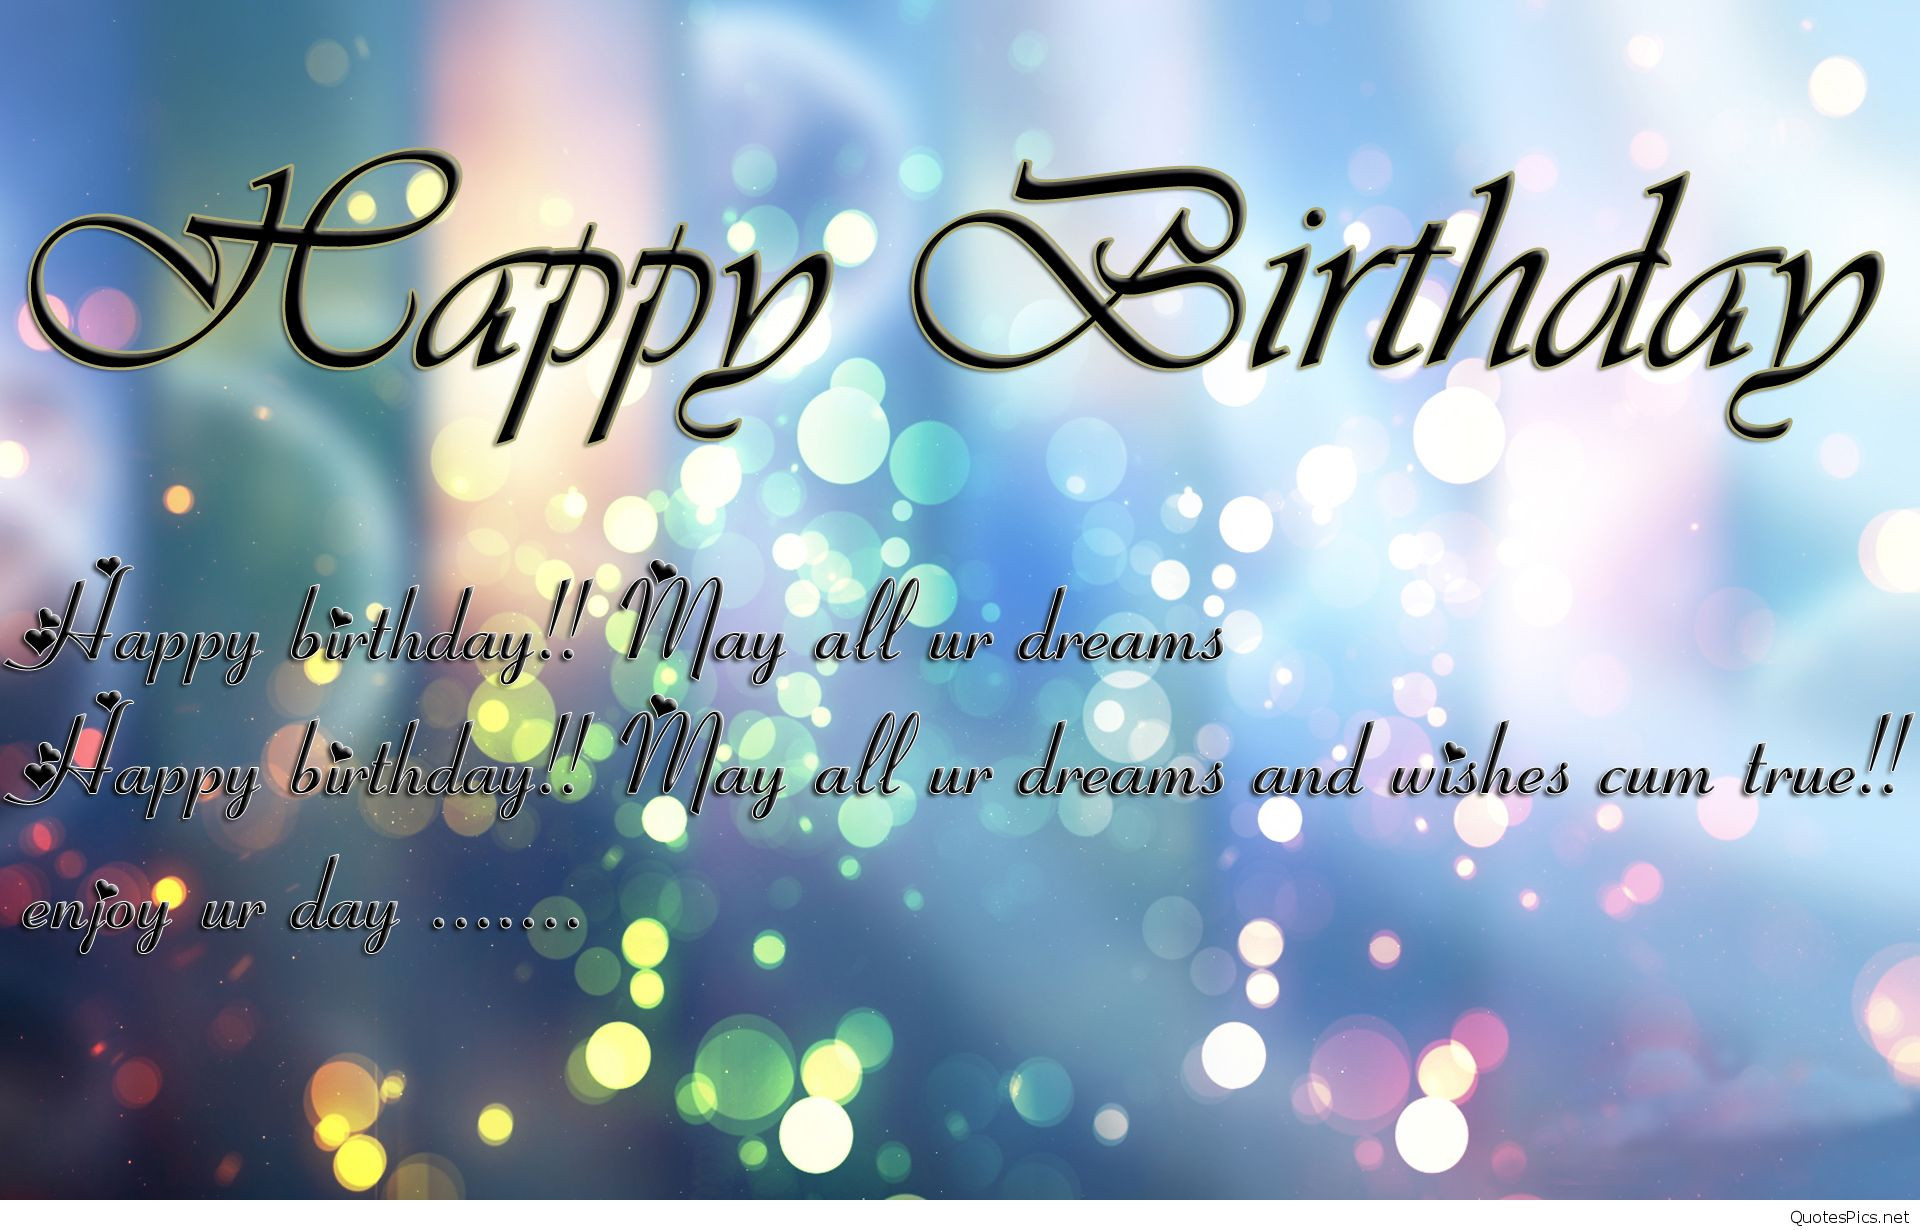 Happy Birthday Quotes Facebook
 Amazing birthday wishes cards and wallpapers hd